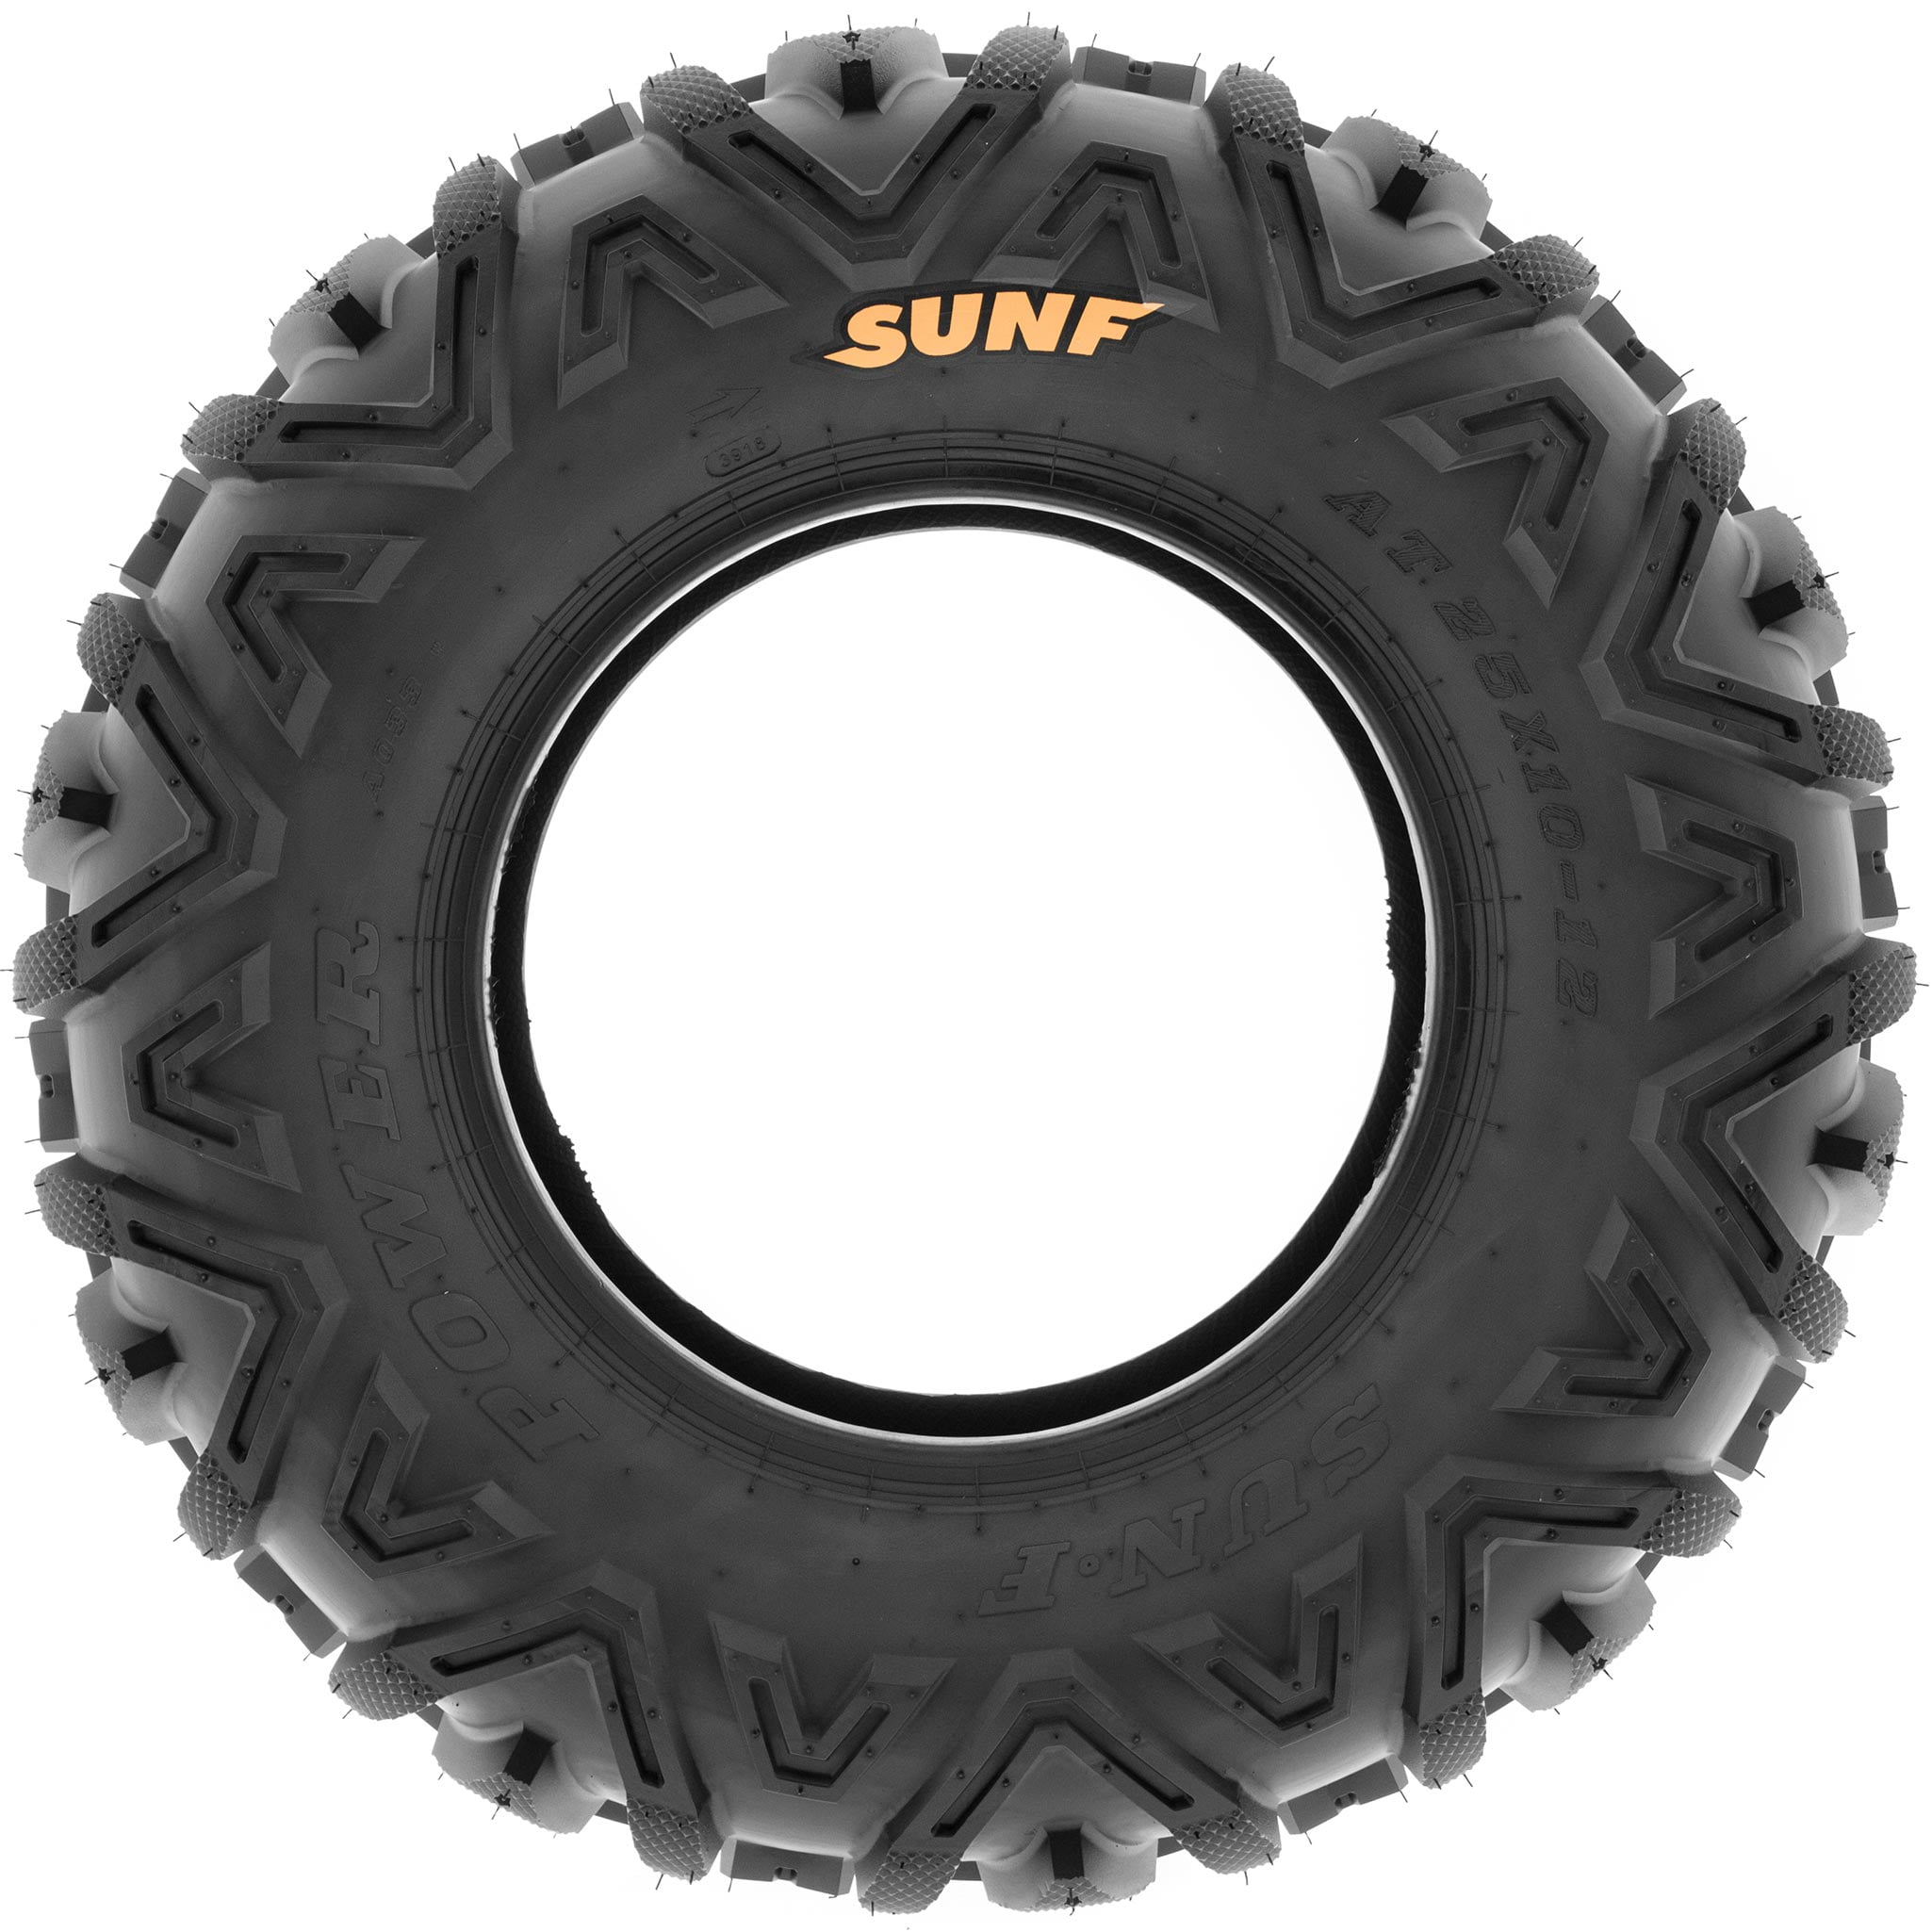 SunF Mud Trail Replacement ATV UTV 6 Ply Tires 27x9-12 & 27x11-12 Tubeless A048, Set of 4 